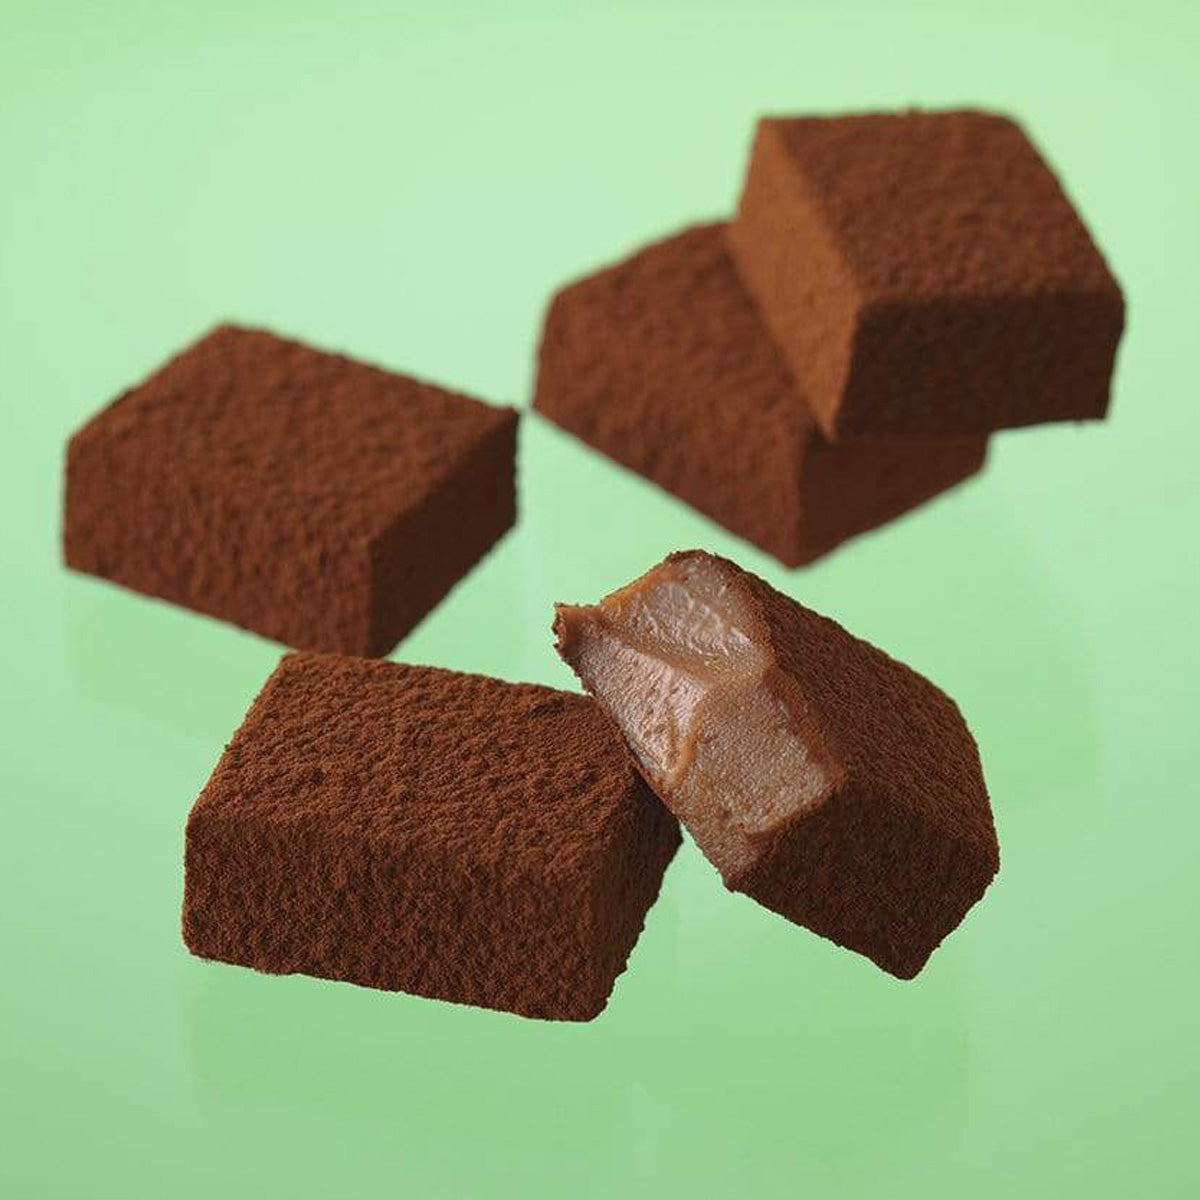 ROYCE' Chocolate - Nama Chocolate "Champagne Pierre Mignon" - Image shows brown blocks of chocolates with a green background.